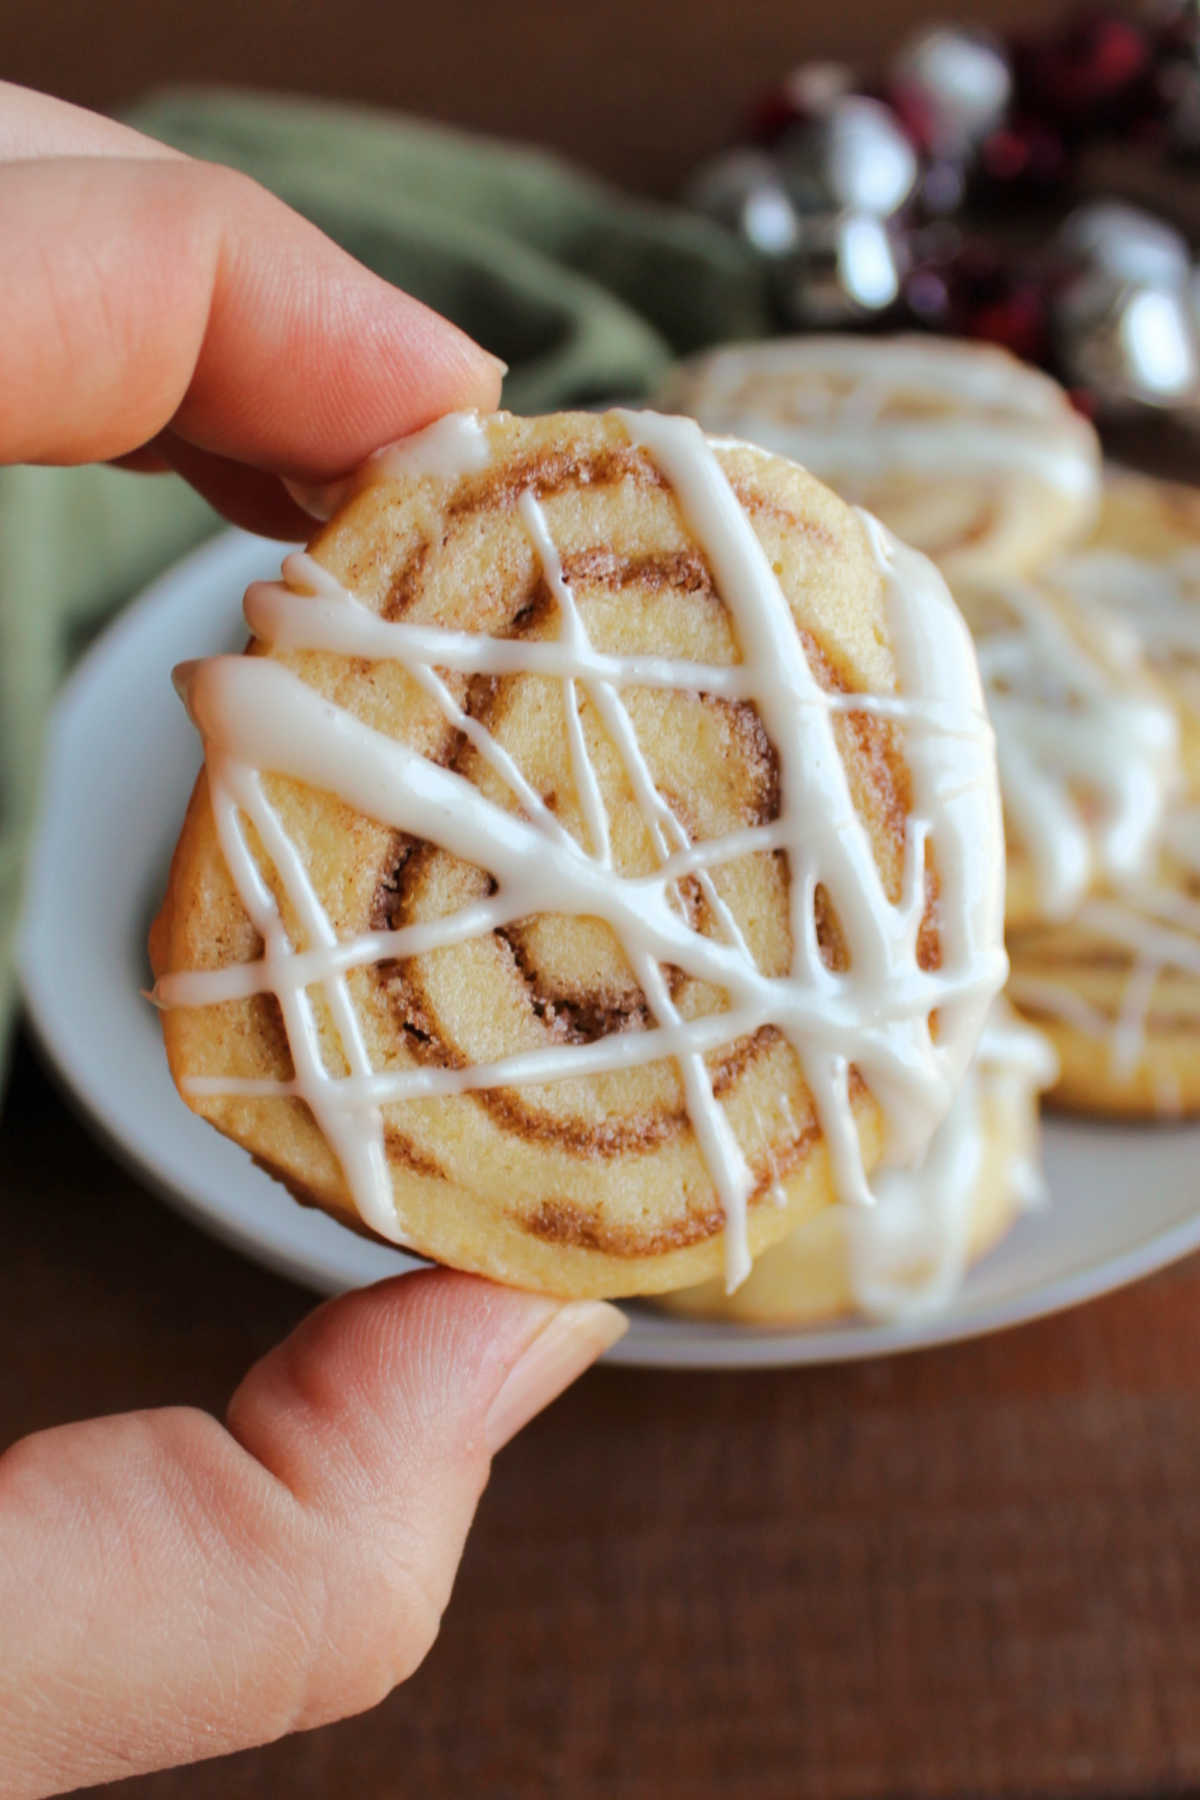 Hand holding a cinnamon roll cookie with swirls of cinnamon filling baked inside and cream cheese icing drizzled over the top.